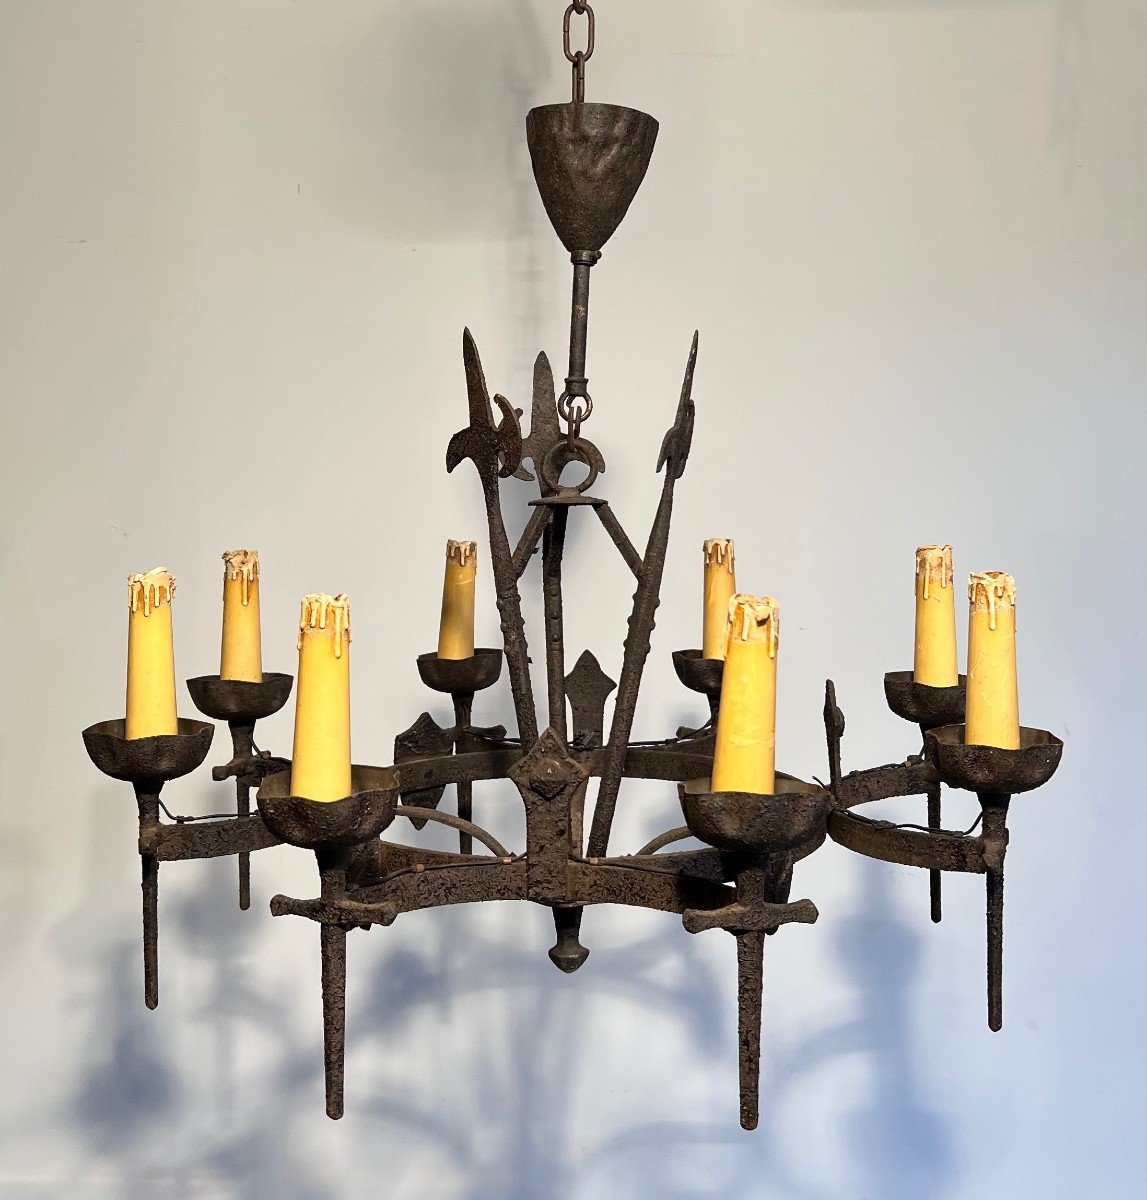 Gothic Style Wrought Iron Chandelier With 8 Arms Of Light. This Chandelier Is Part Of A Rare Set-photo-3